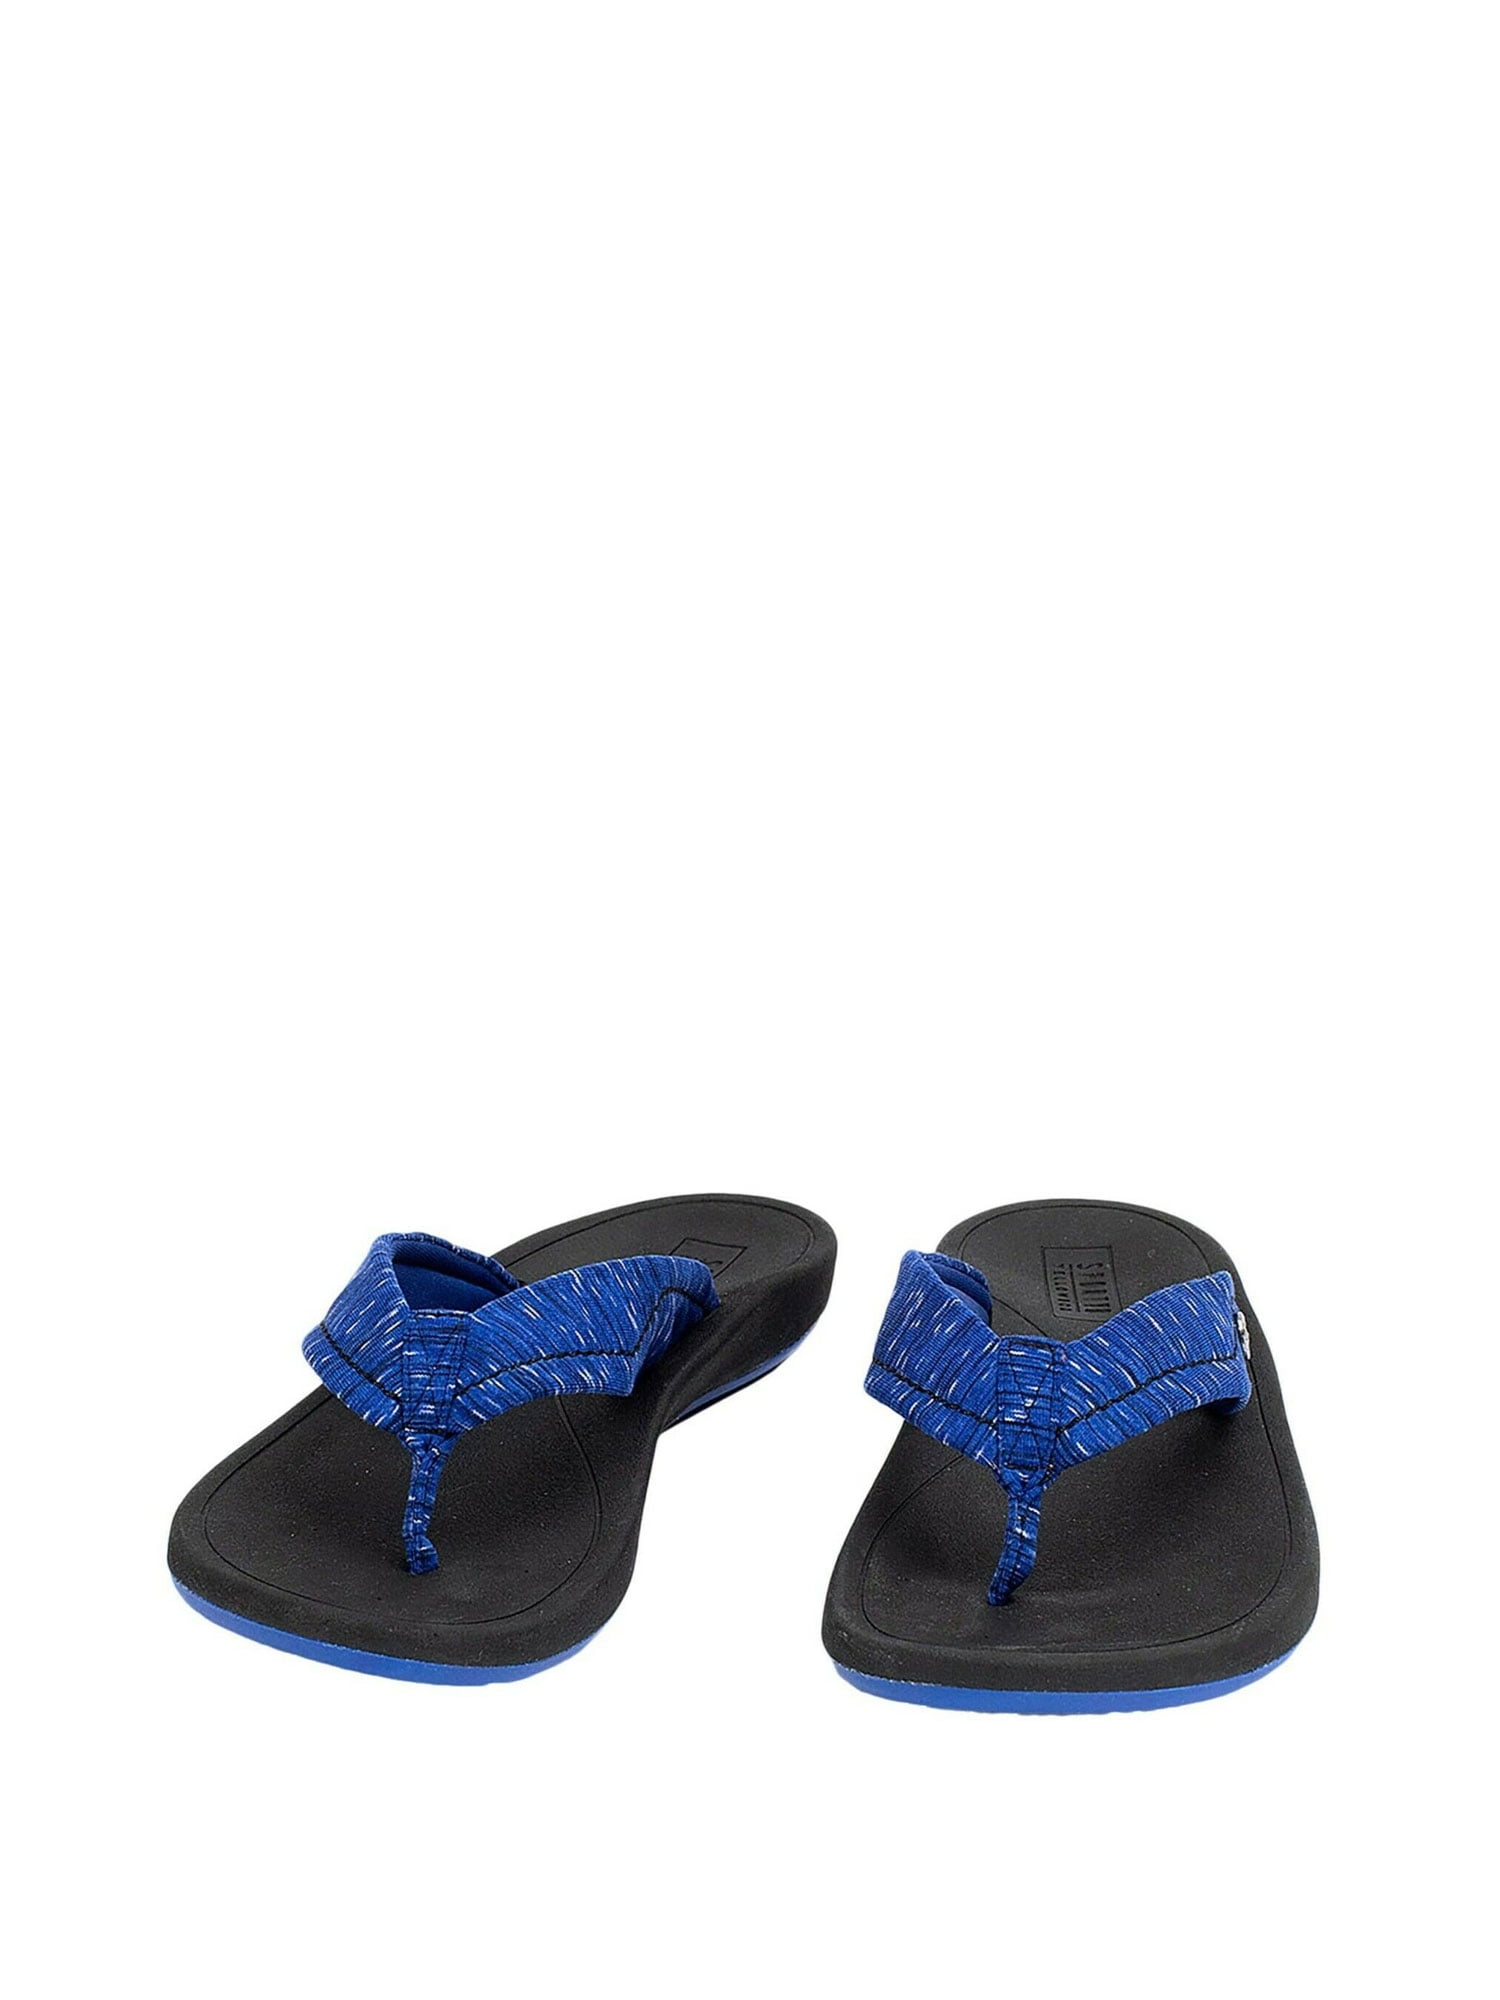 flip flops with material toe post